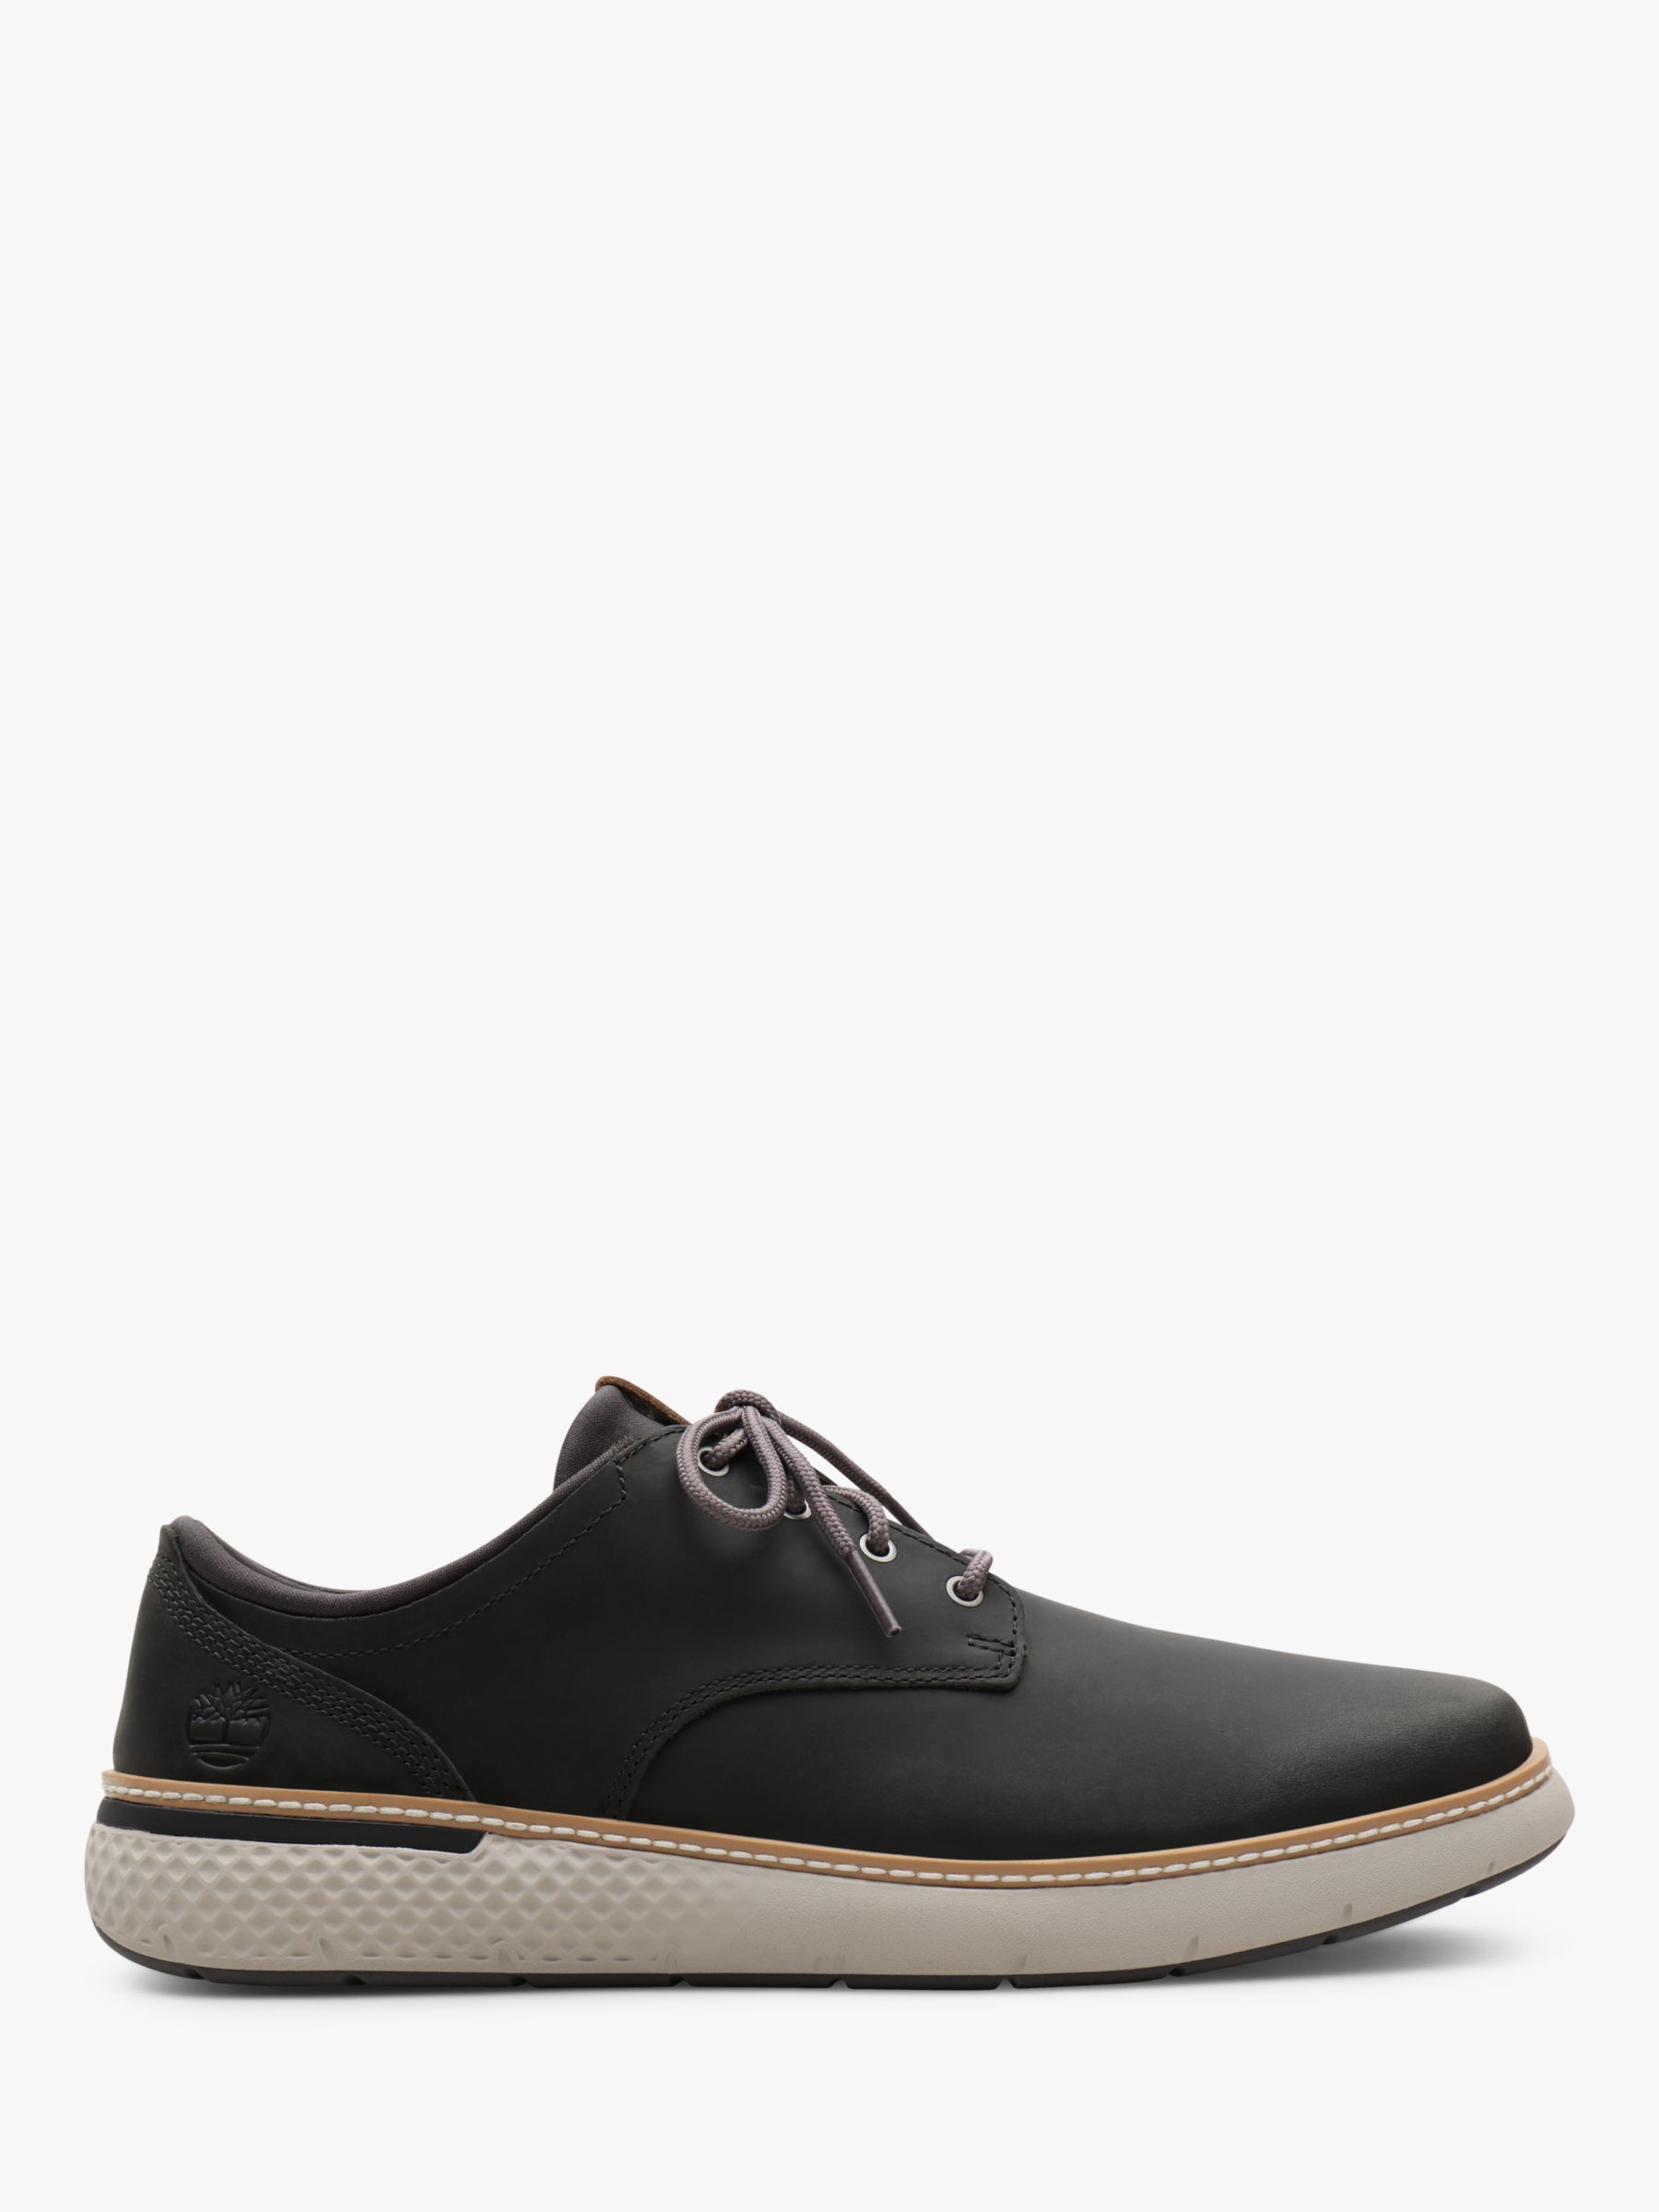 Timberland Cross Mark Oxford Shoes, Pewter